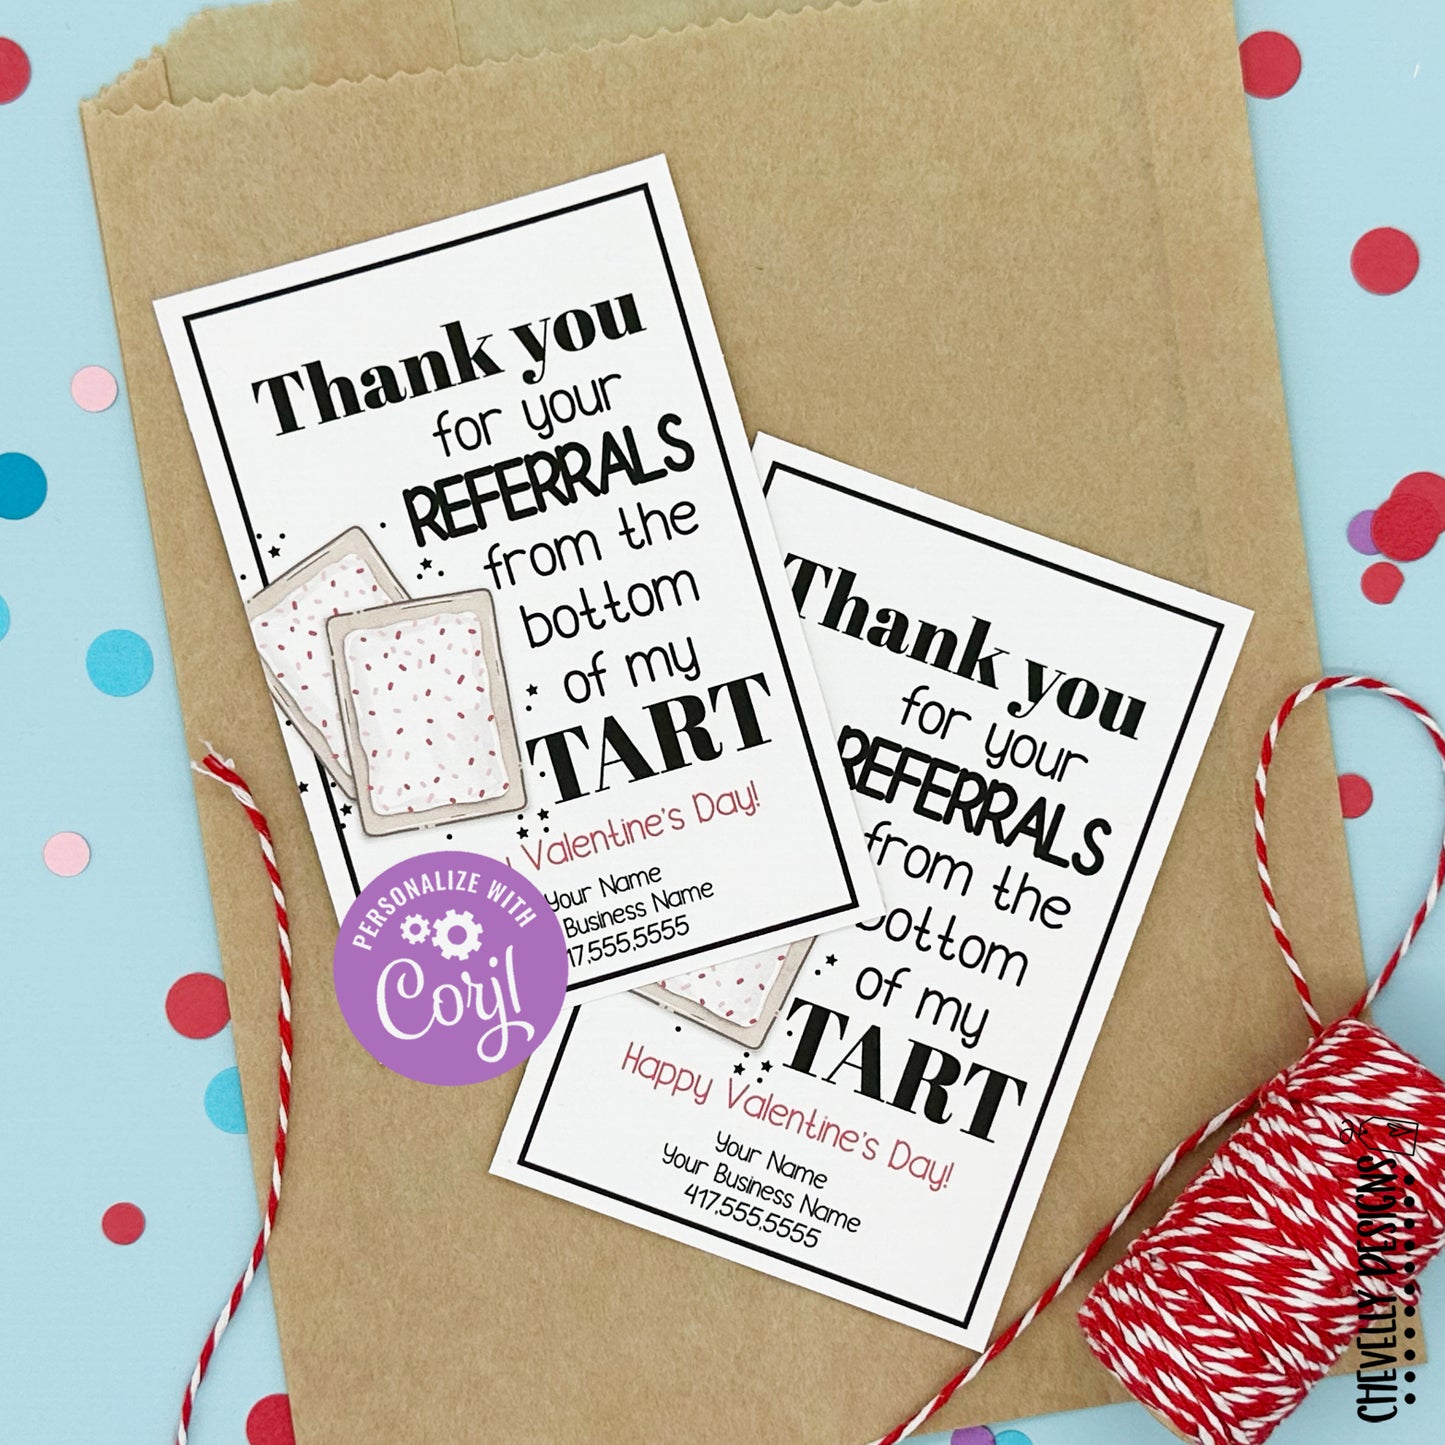 EDITABLE - Thank You for your Referrals from the Bottom of my Tart - Pop Tart Valentine Tags - Printable Digital File